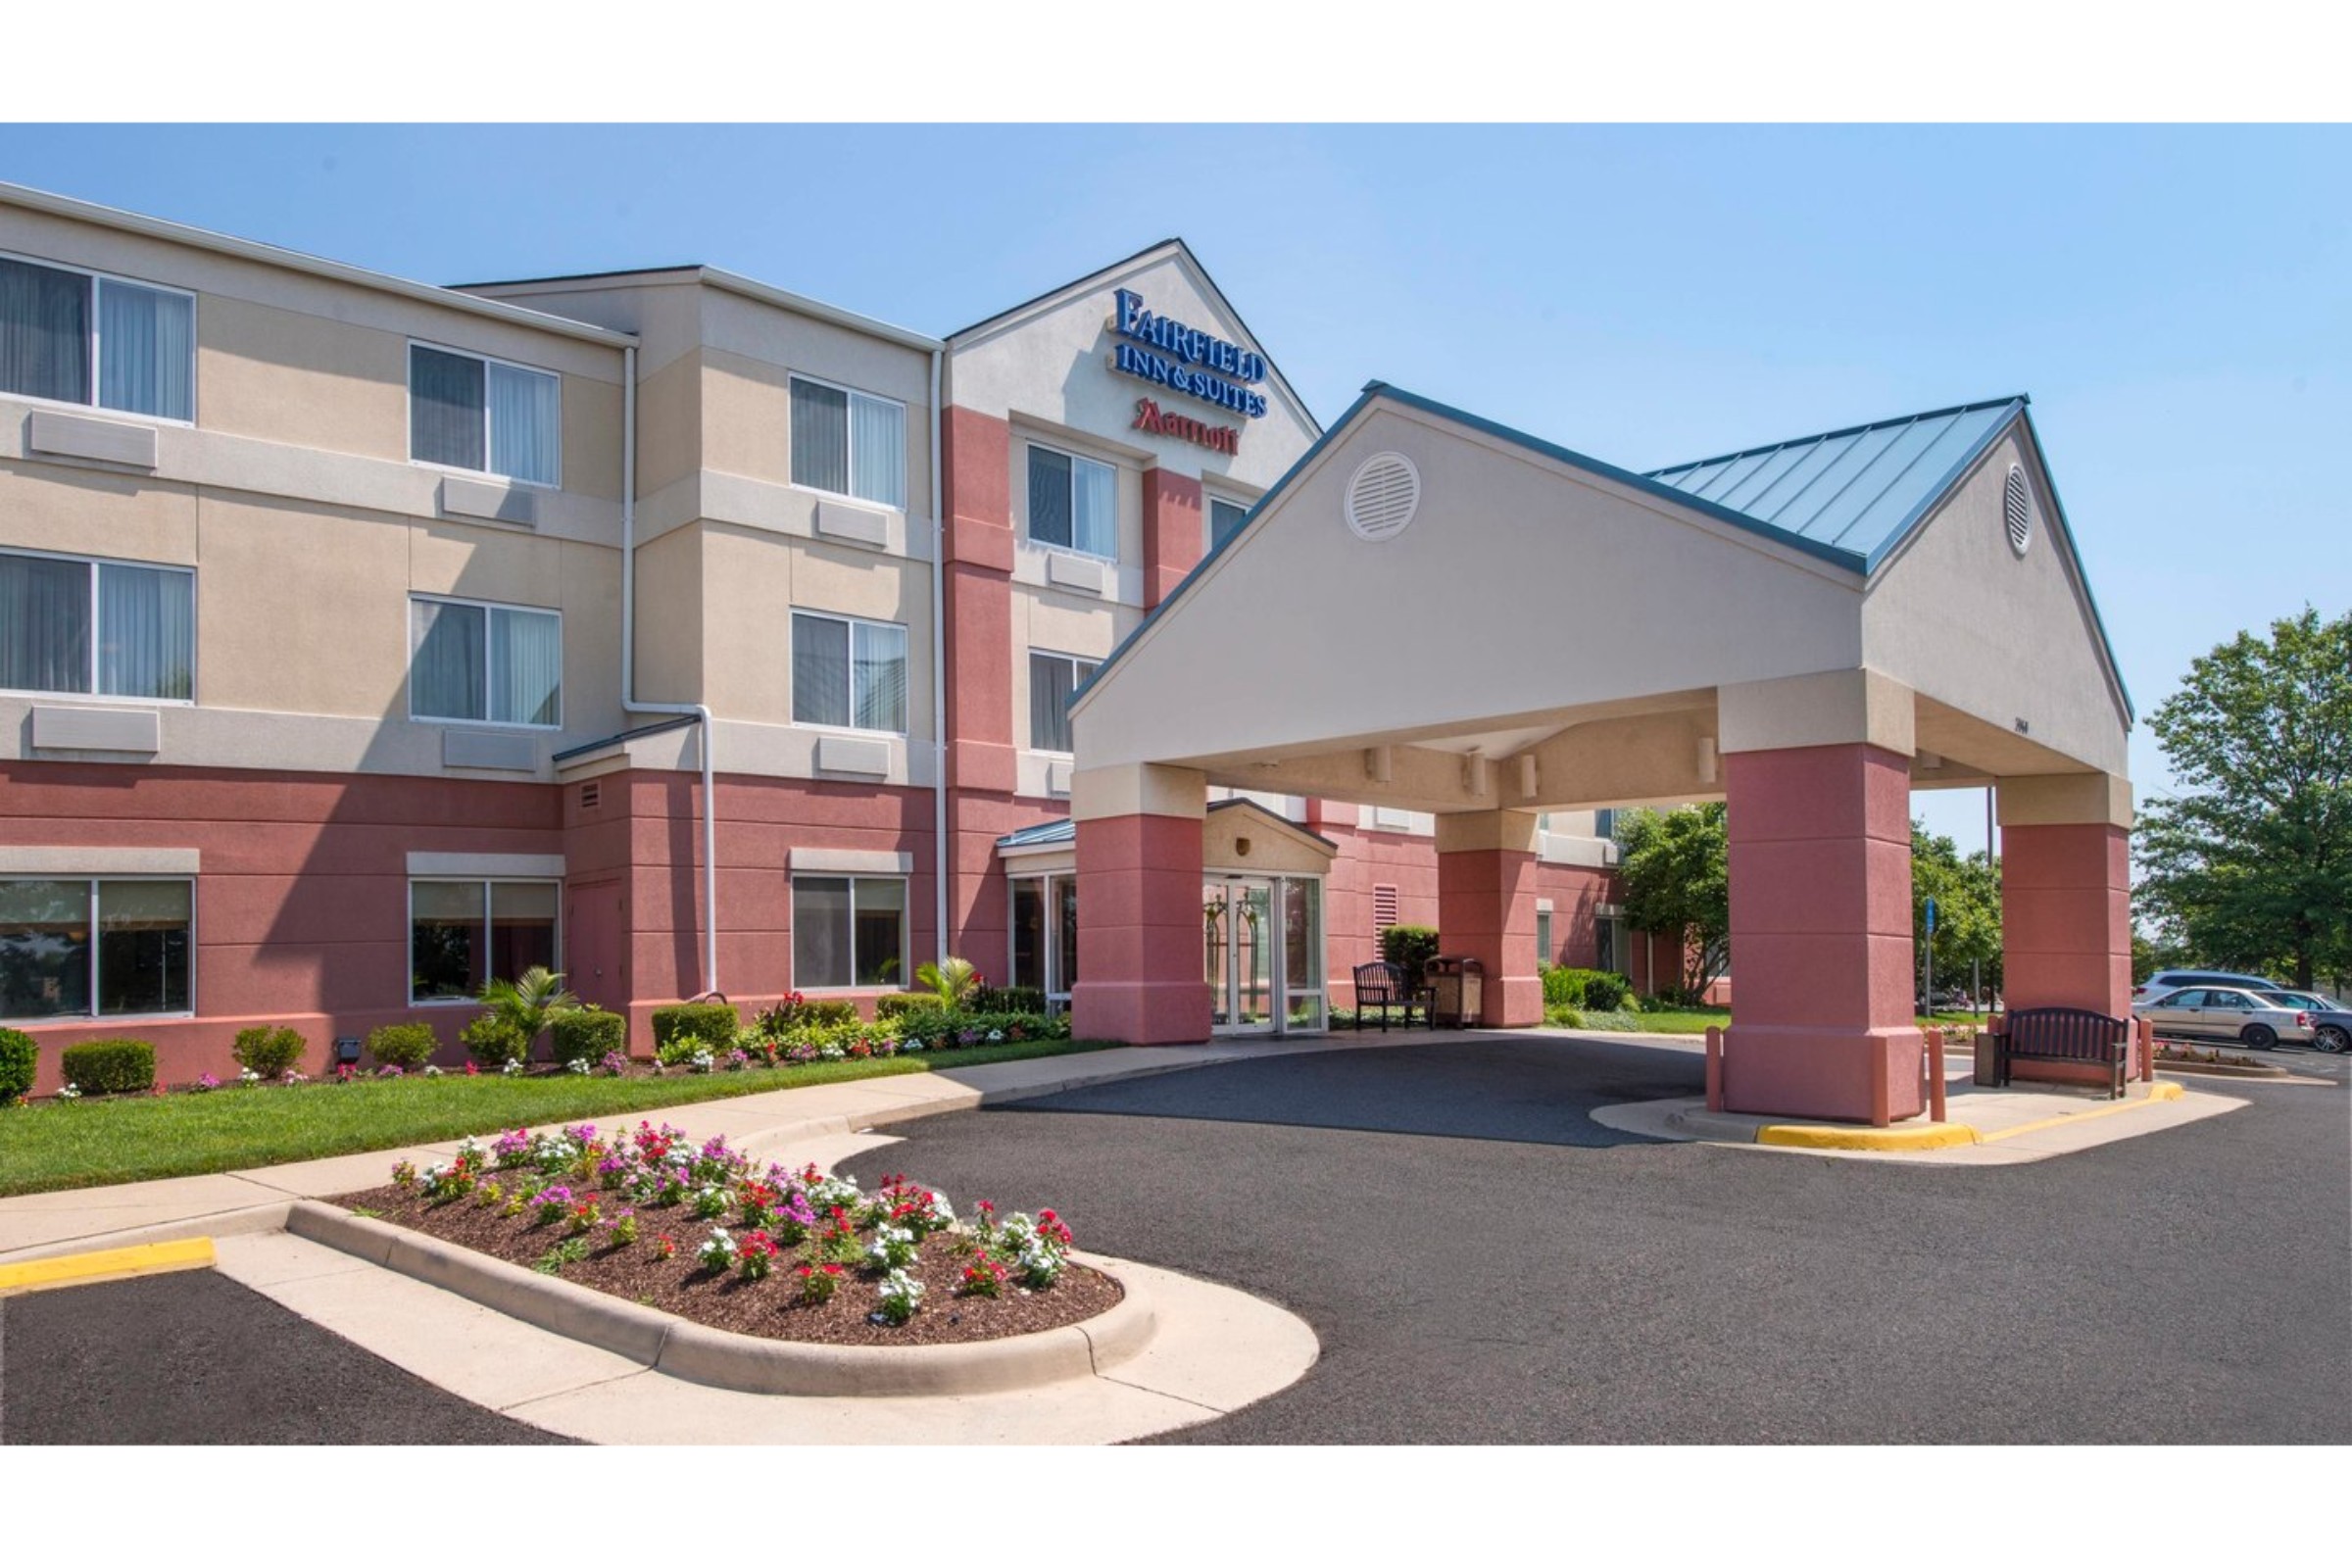 Fairfield Inn & Suites by Marriott at Dulles Airport image